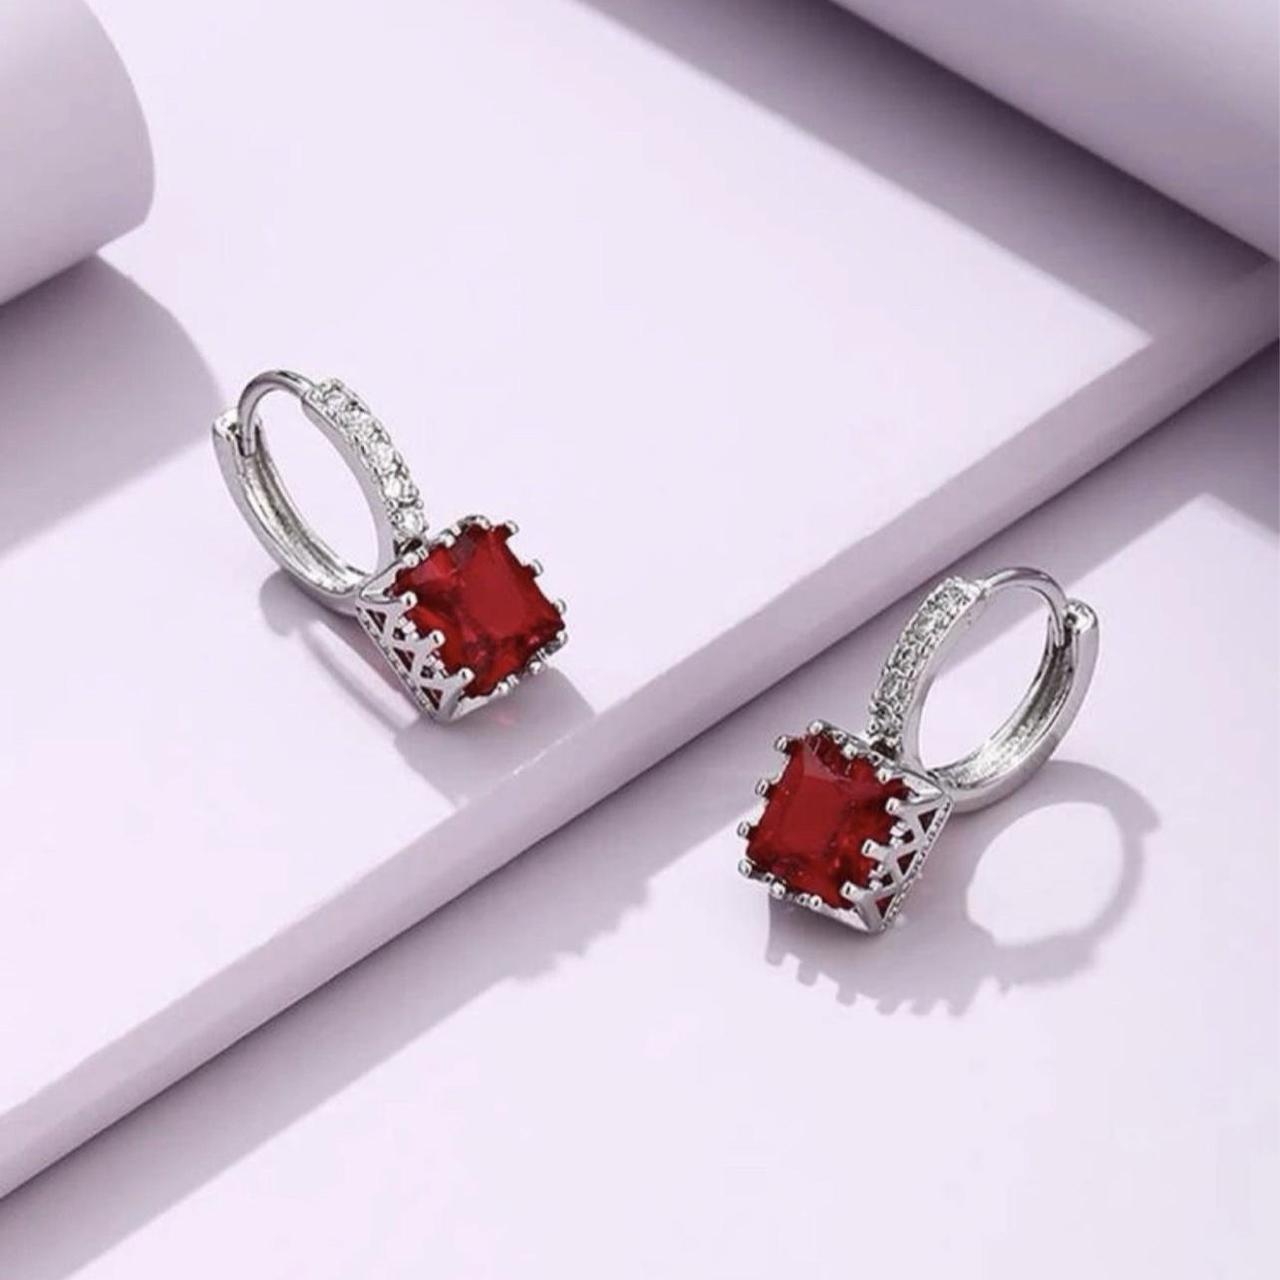 Product Image 2 - New. Red gemstone earrings .